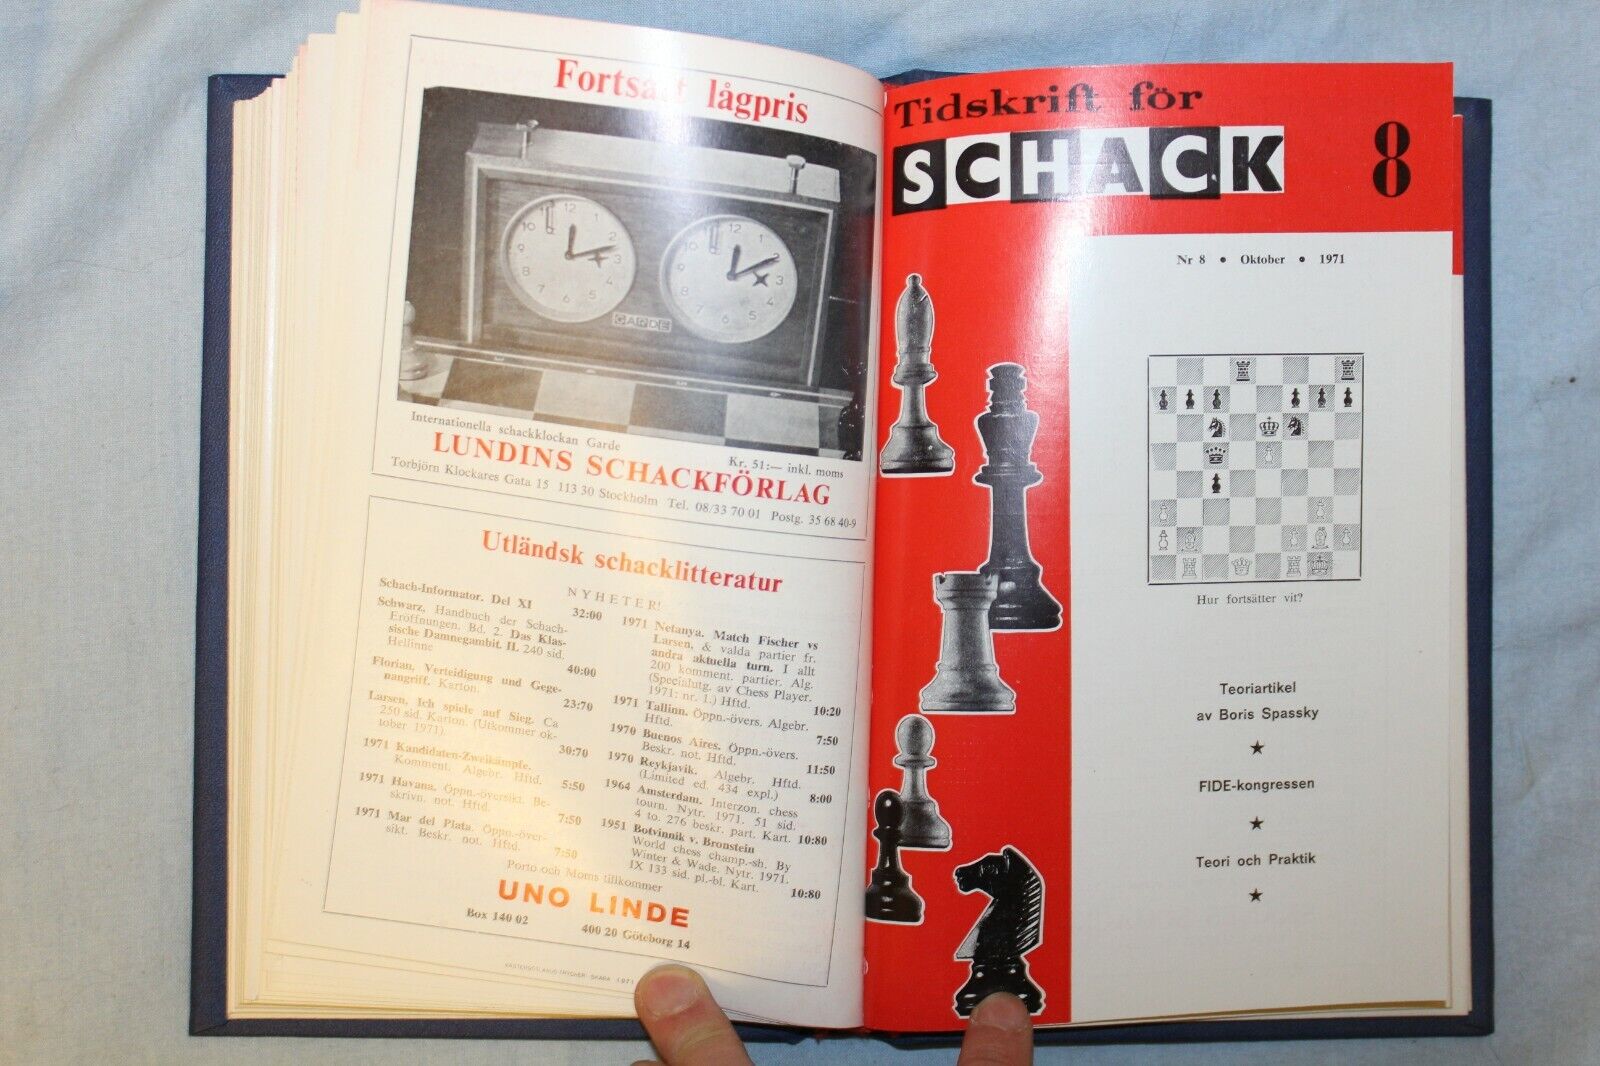 11885.Swedish Chess Magazine Tidskrift for Schack. Complete yearly set 10 issues. 1971